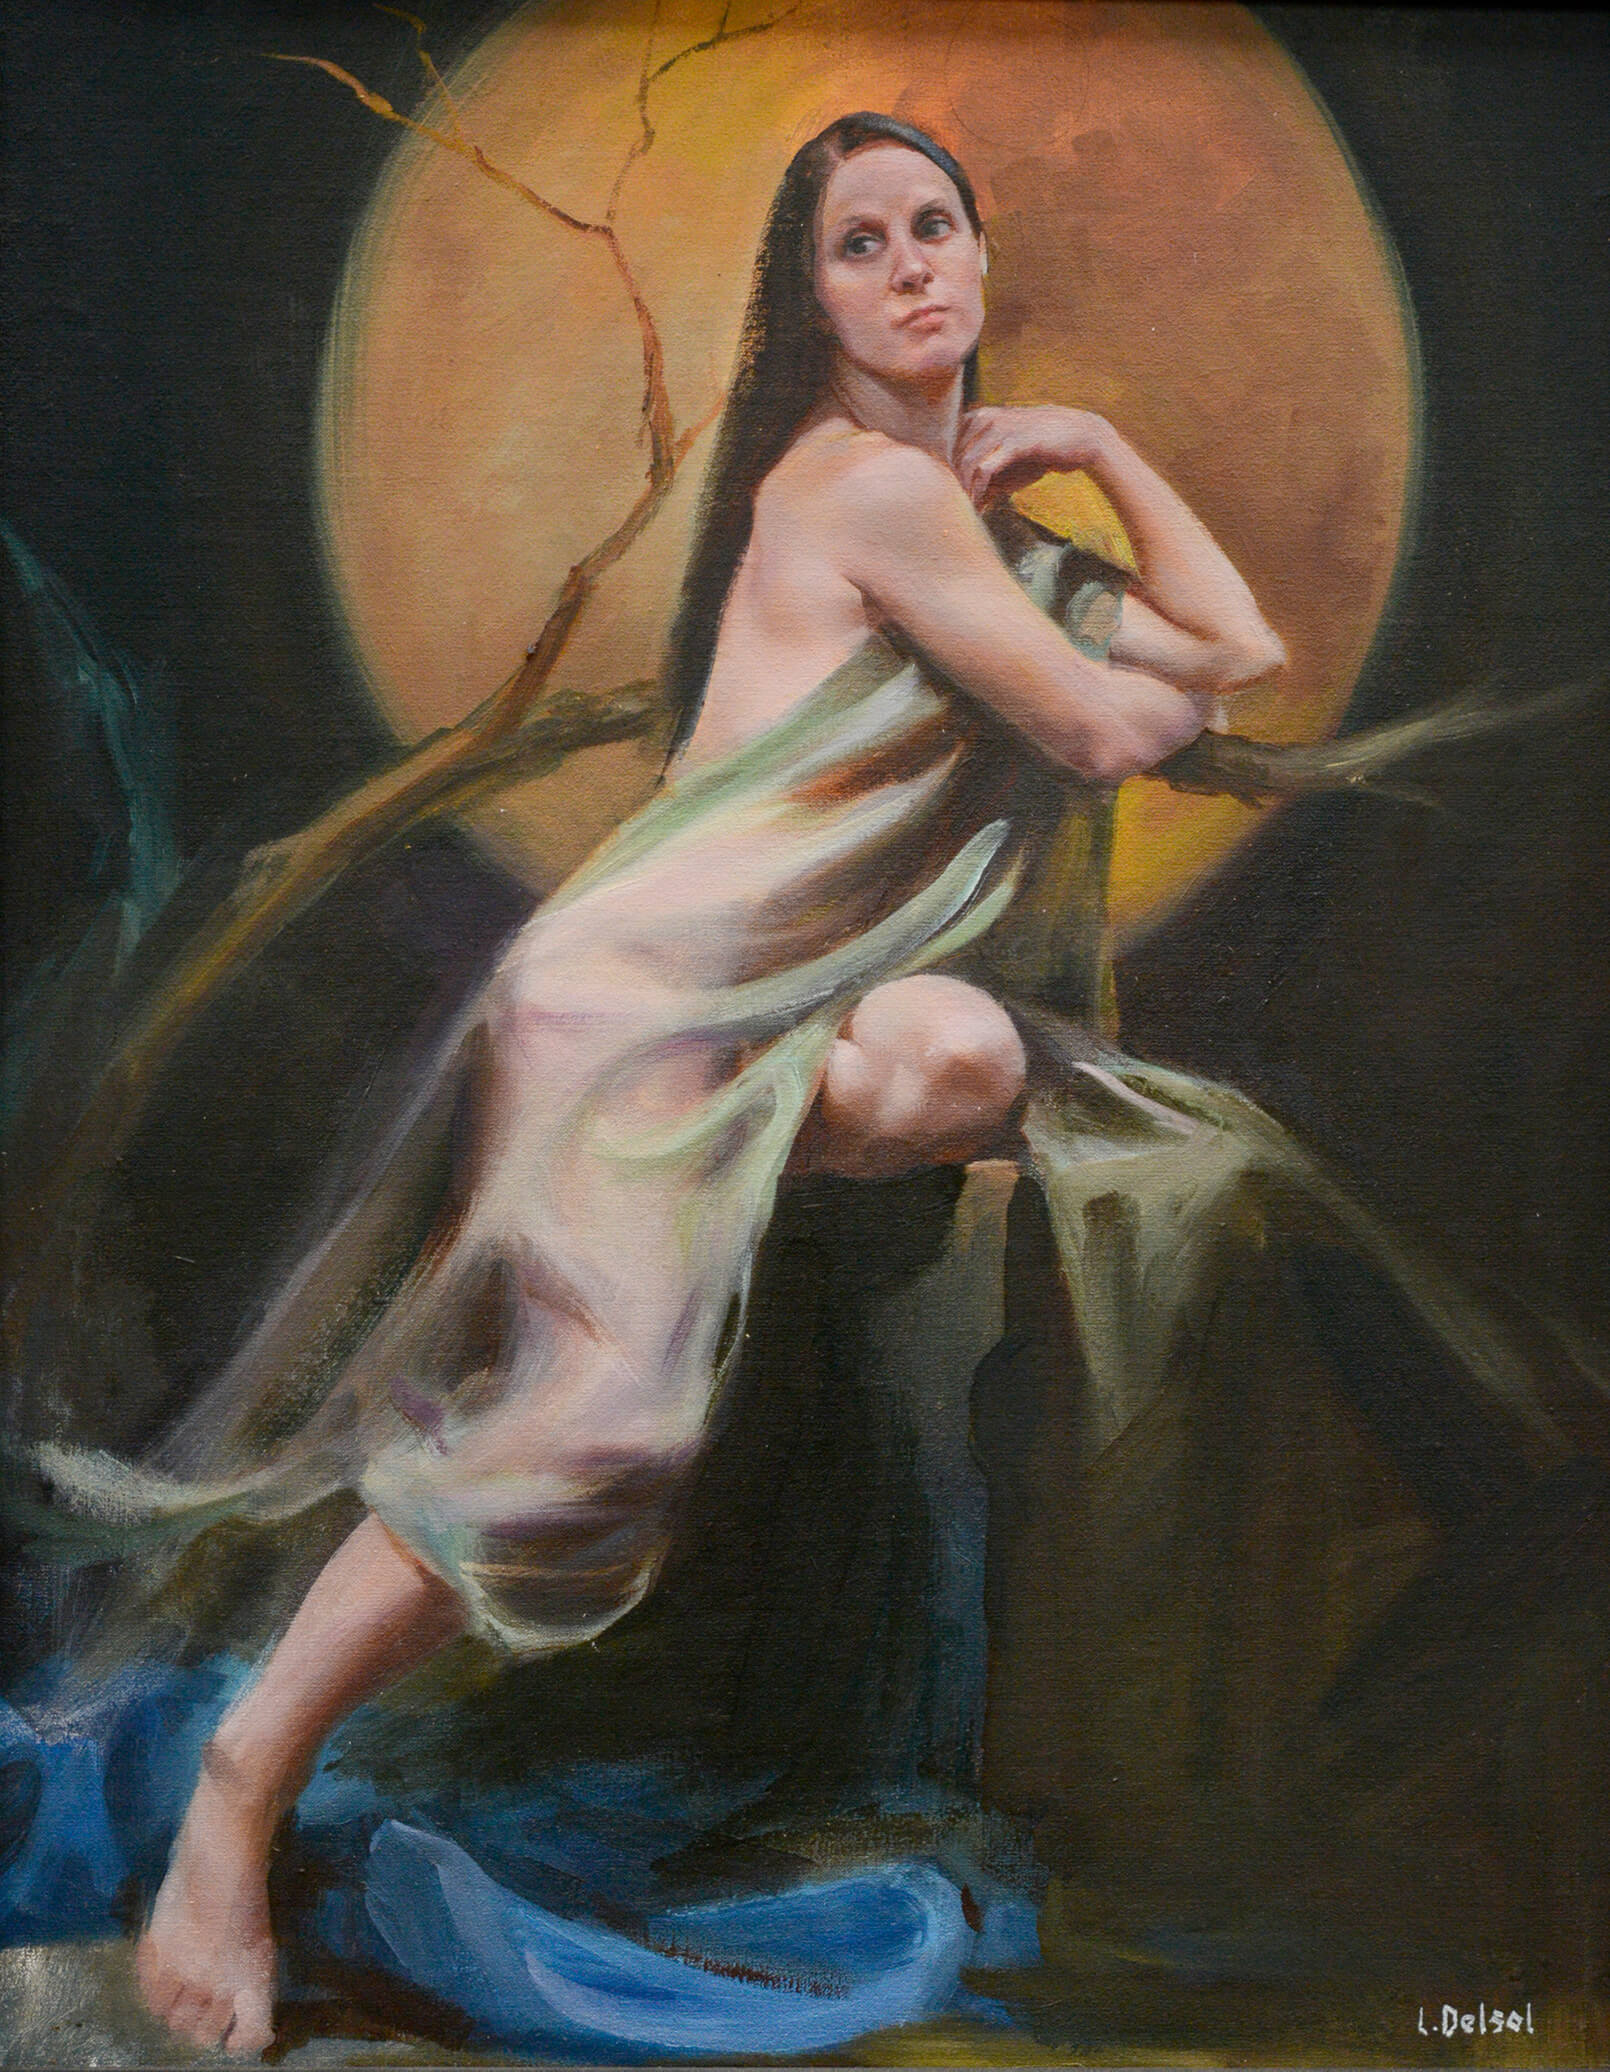 Realistic full figure oil painting of chiffon fabric draped woman leaning on a tree branch framed by a harvest moon